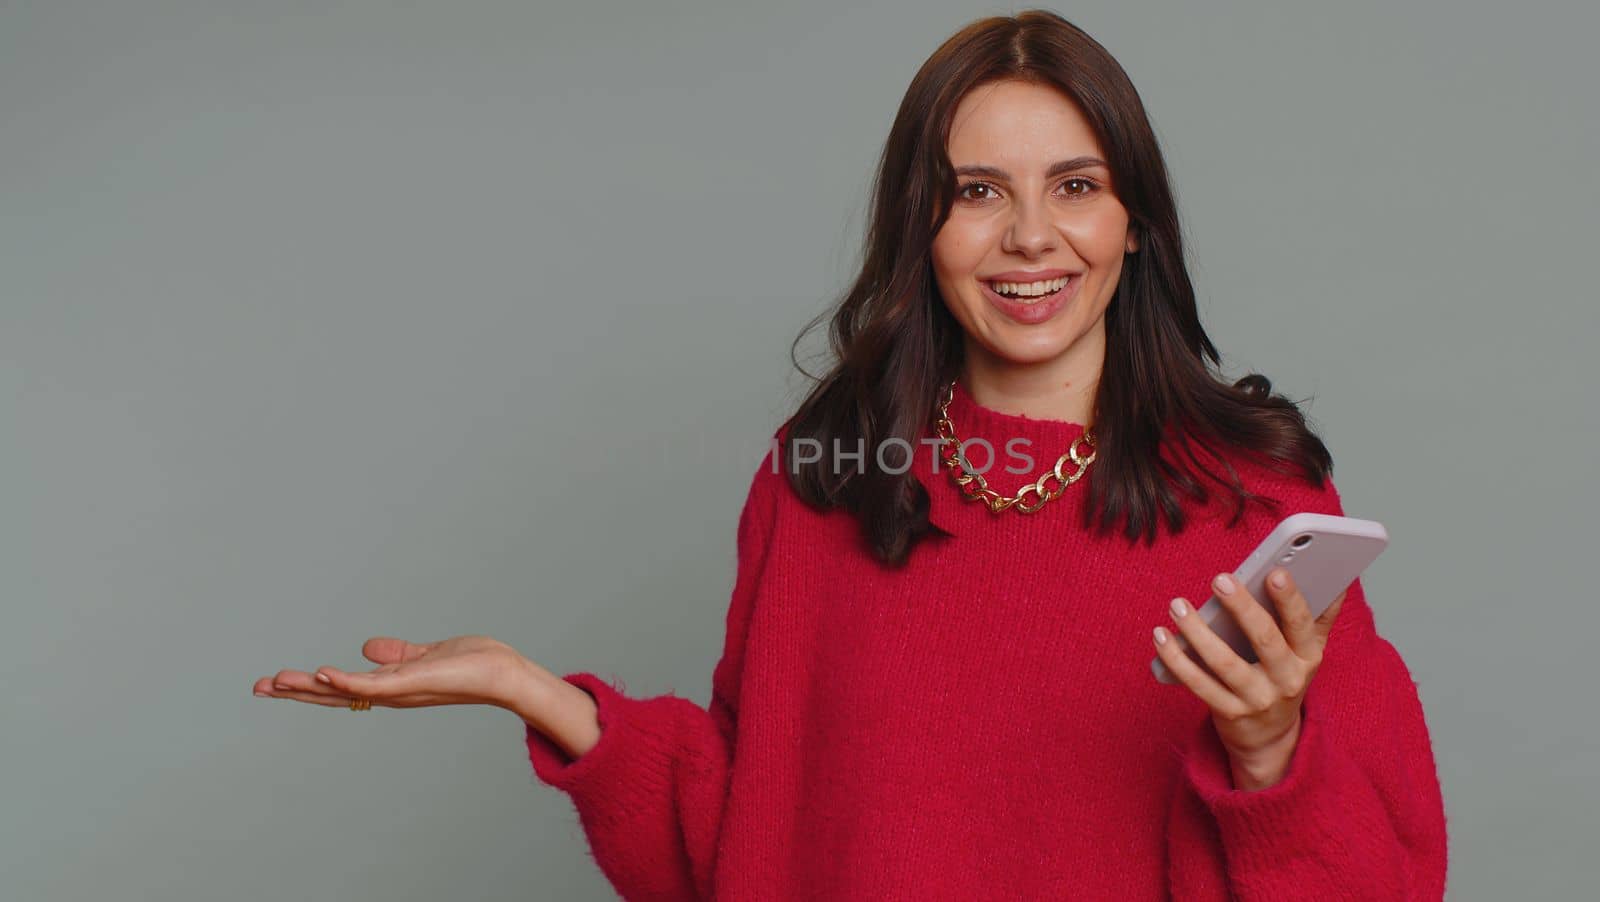 Woman using smartphone pointing empty place, advertising area for commercial text, copy space for goods application promotion social networks positive feedback. Girl isolated on gray studio background